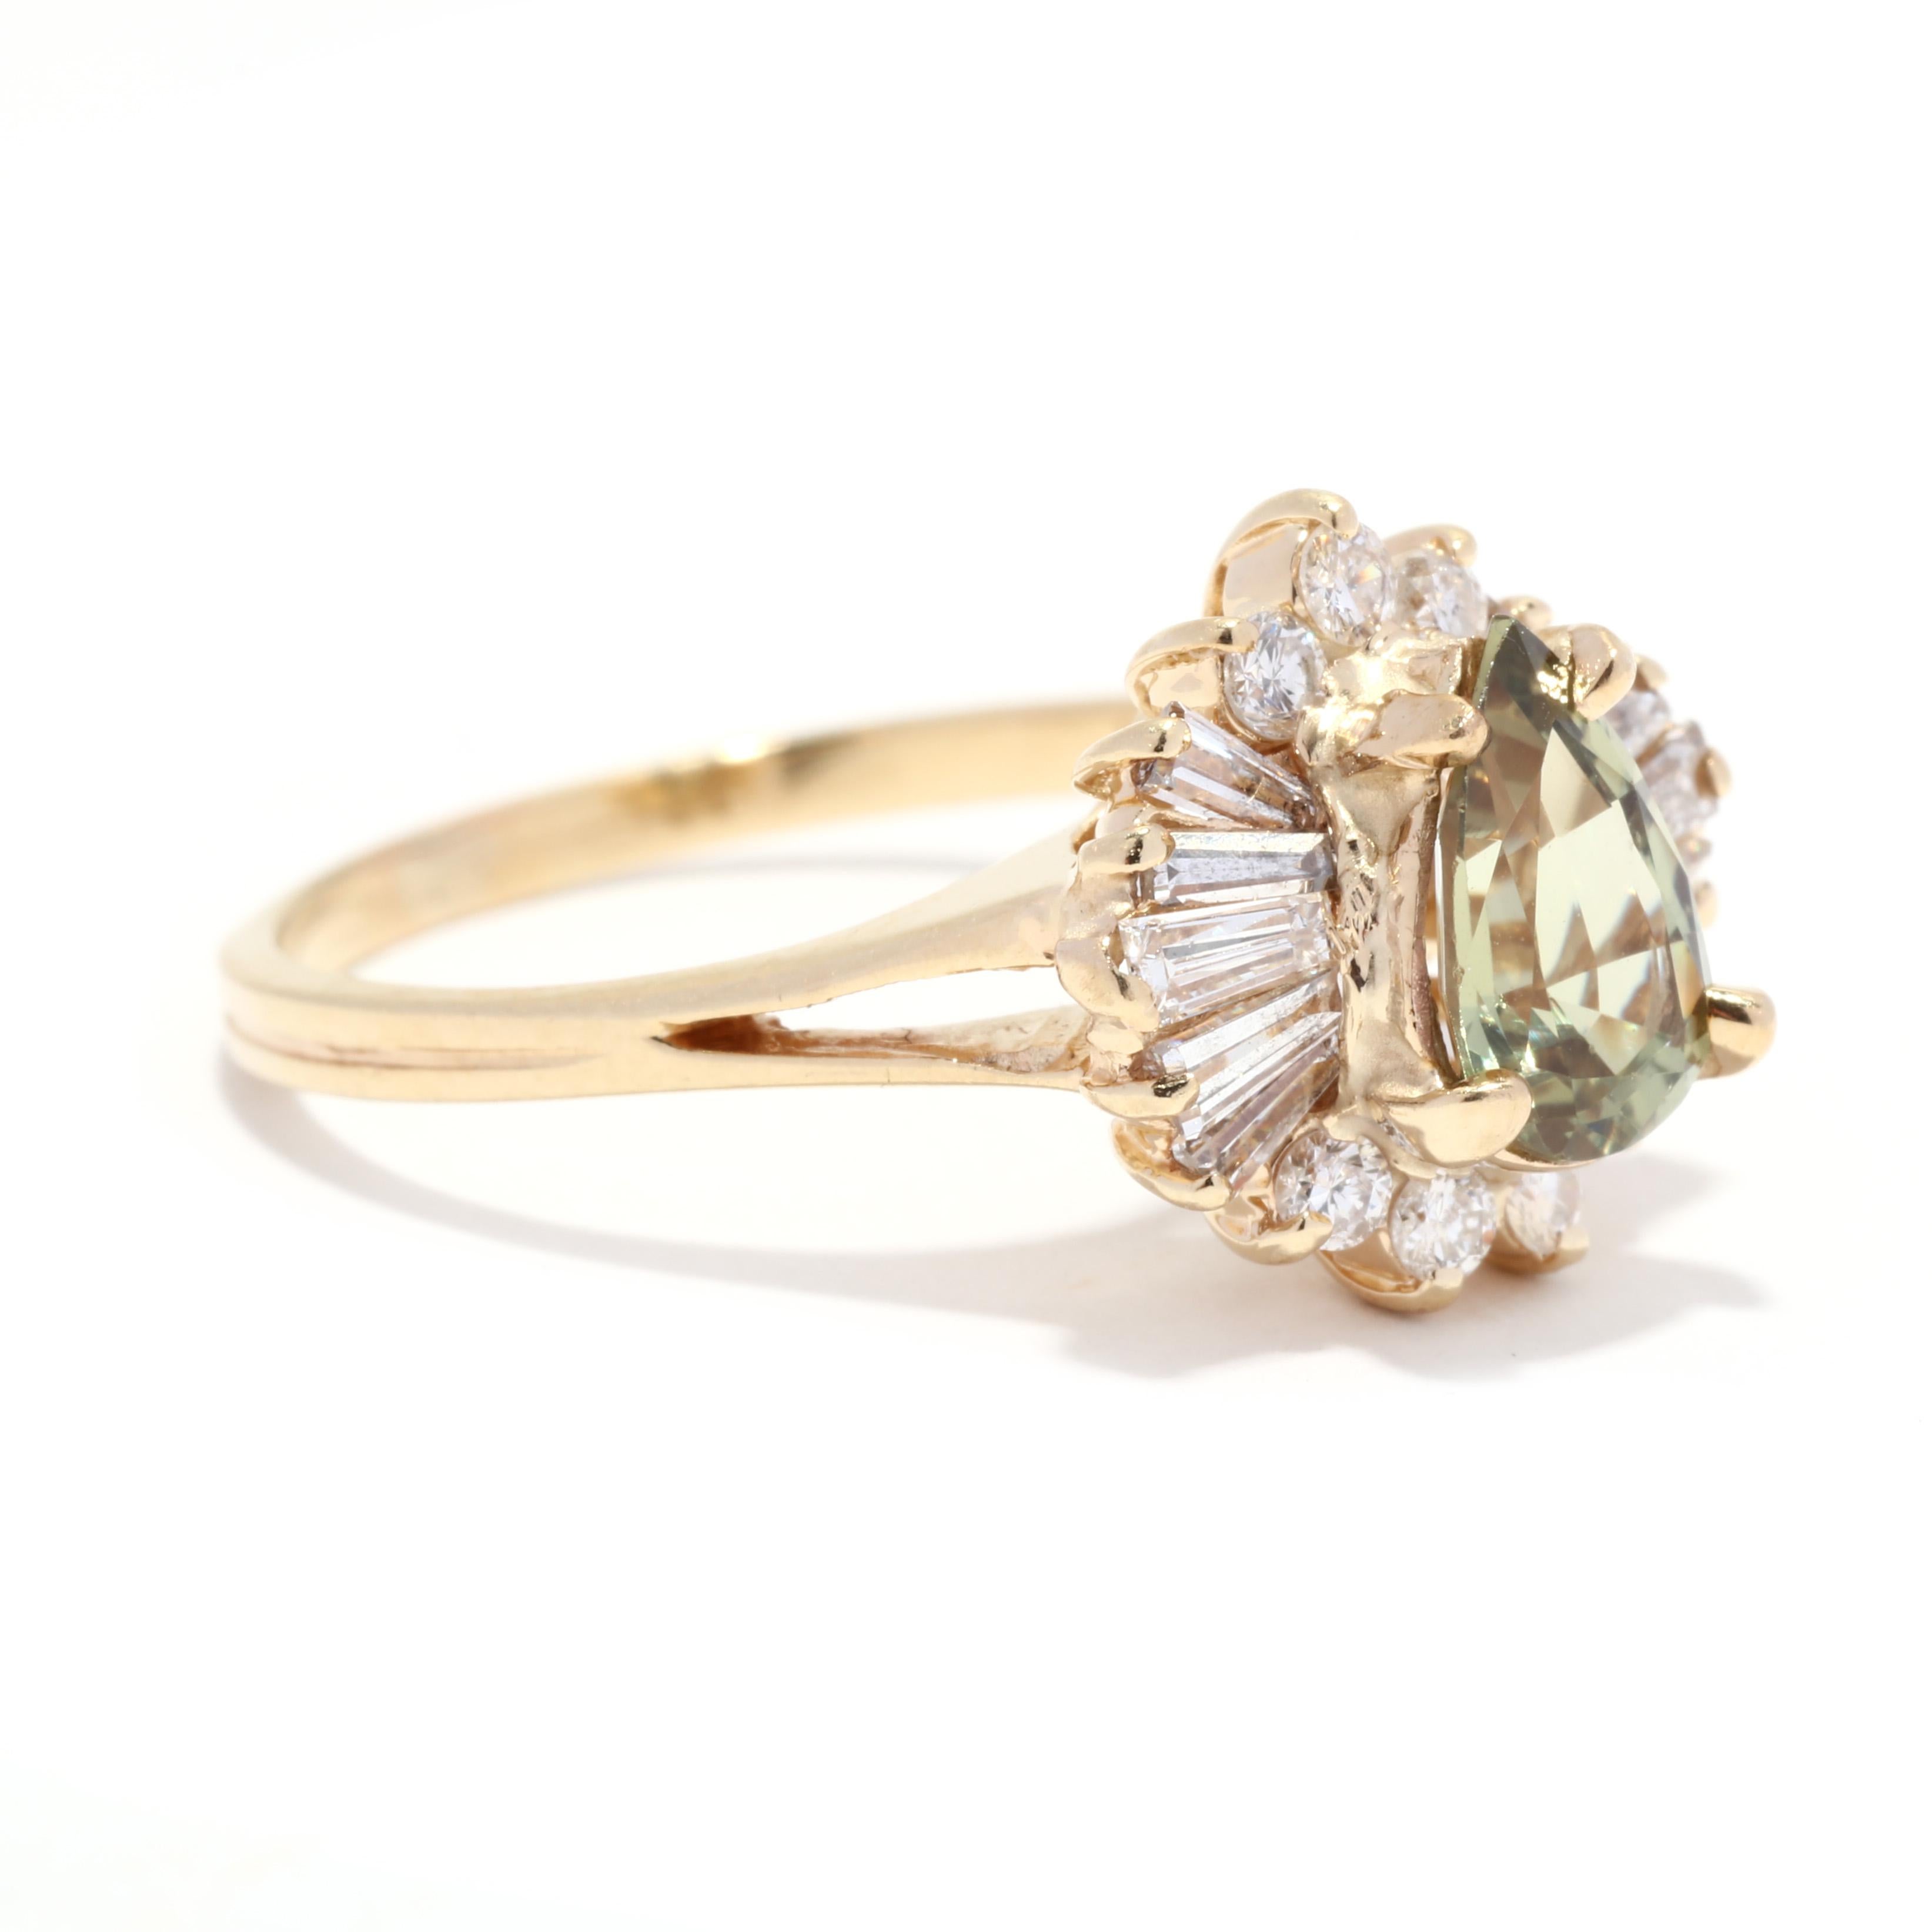 A vintage 14 karat yellow gold chrysoberyl and diamond ballerina ring. This right hand cocktail ring features a prong set, pear cut chrysoberyl weighing approximately .90 carat surrounded by a halo of round brilliant and tapered baguette cut